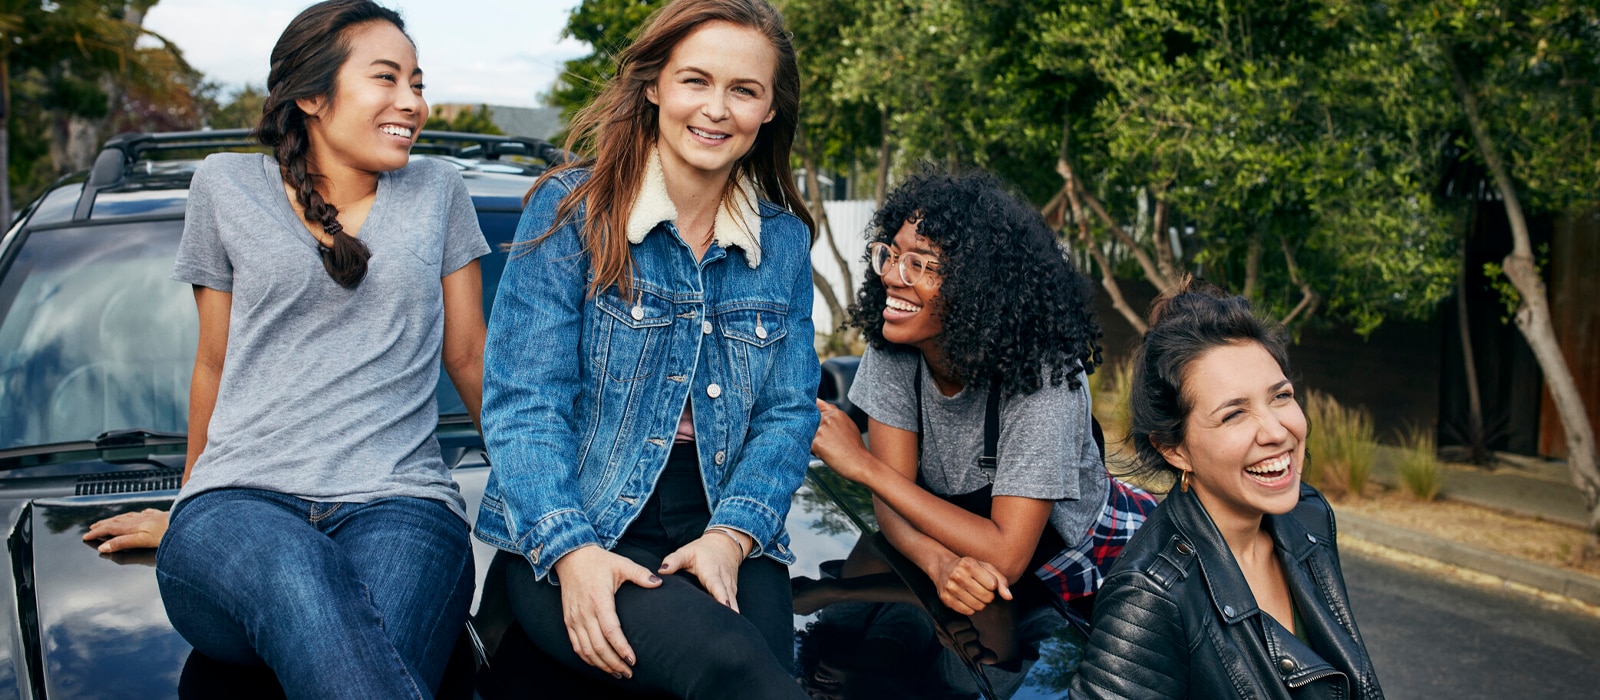 Picture of 4 young women laughing and smiling while sitting on the front of a car